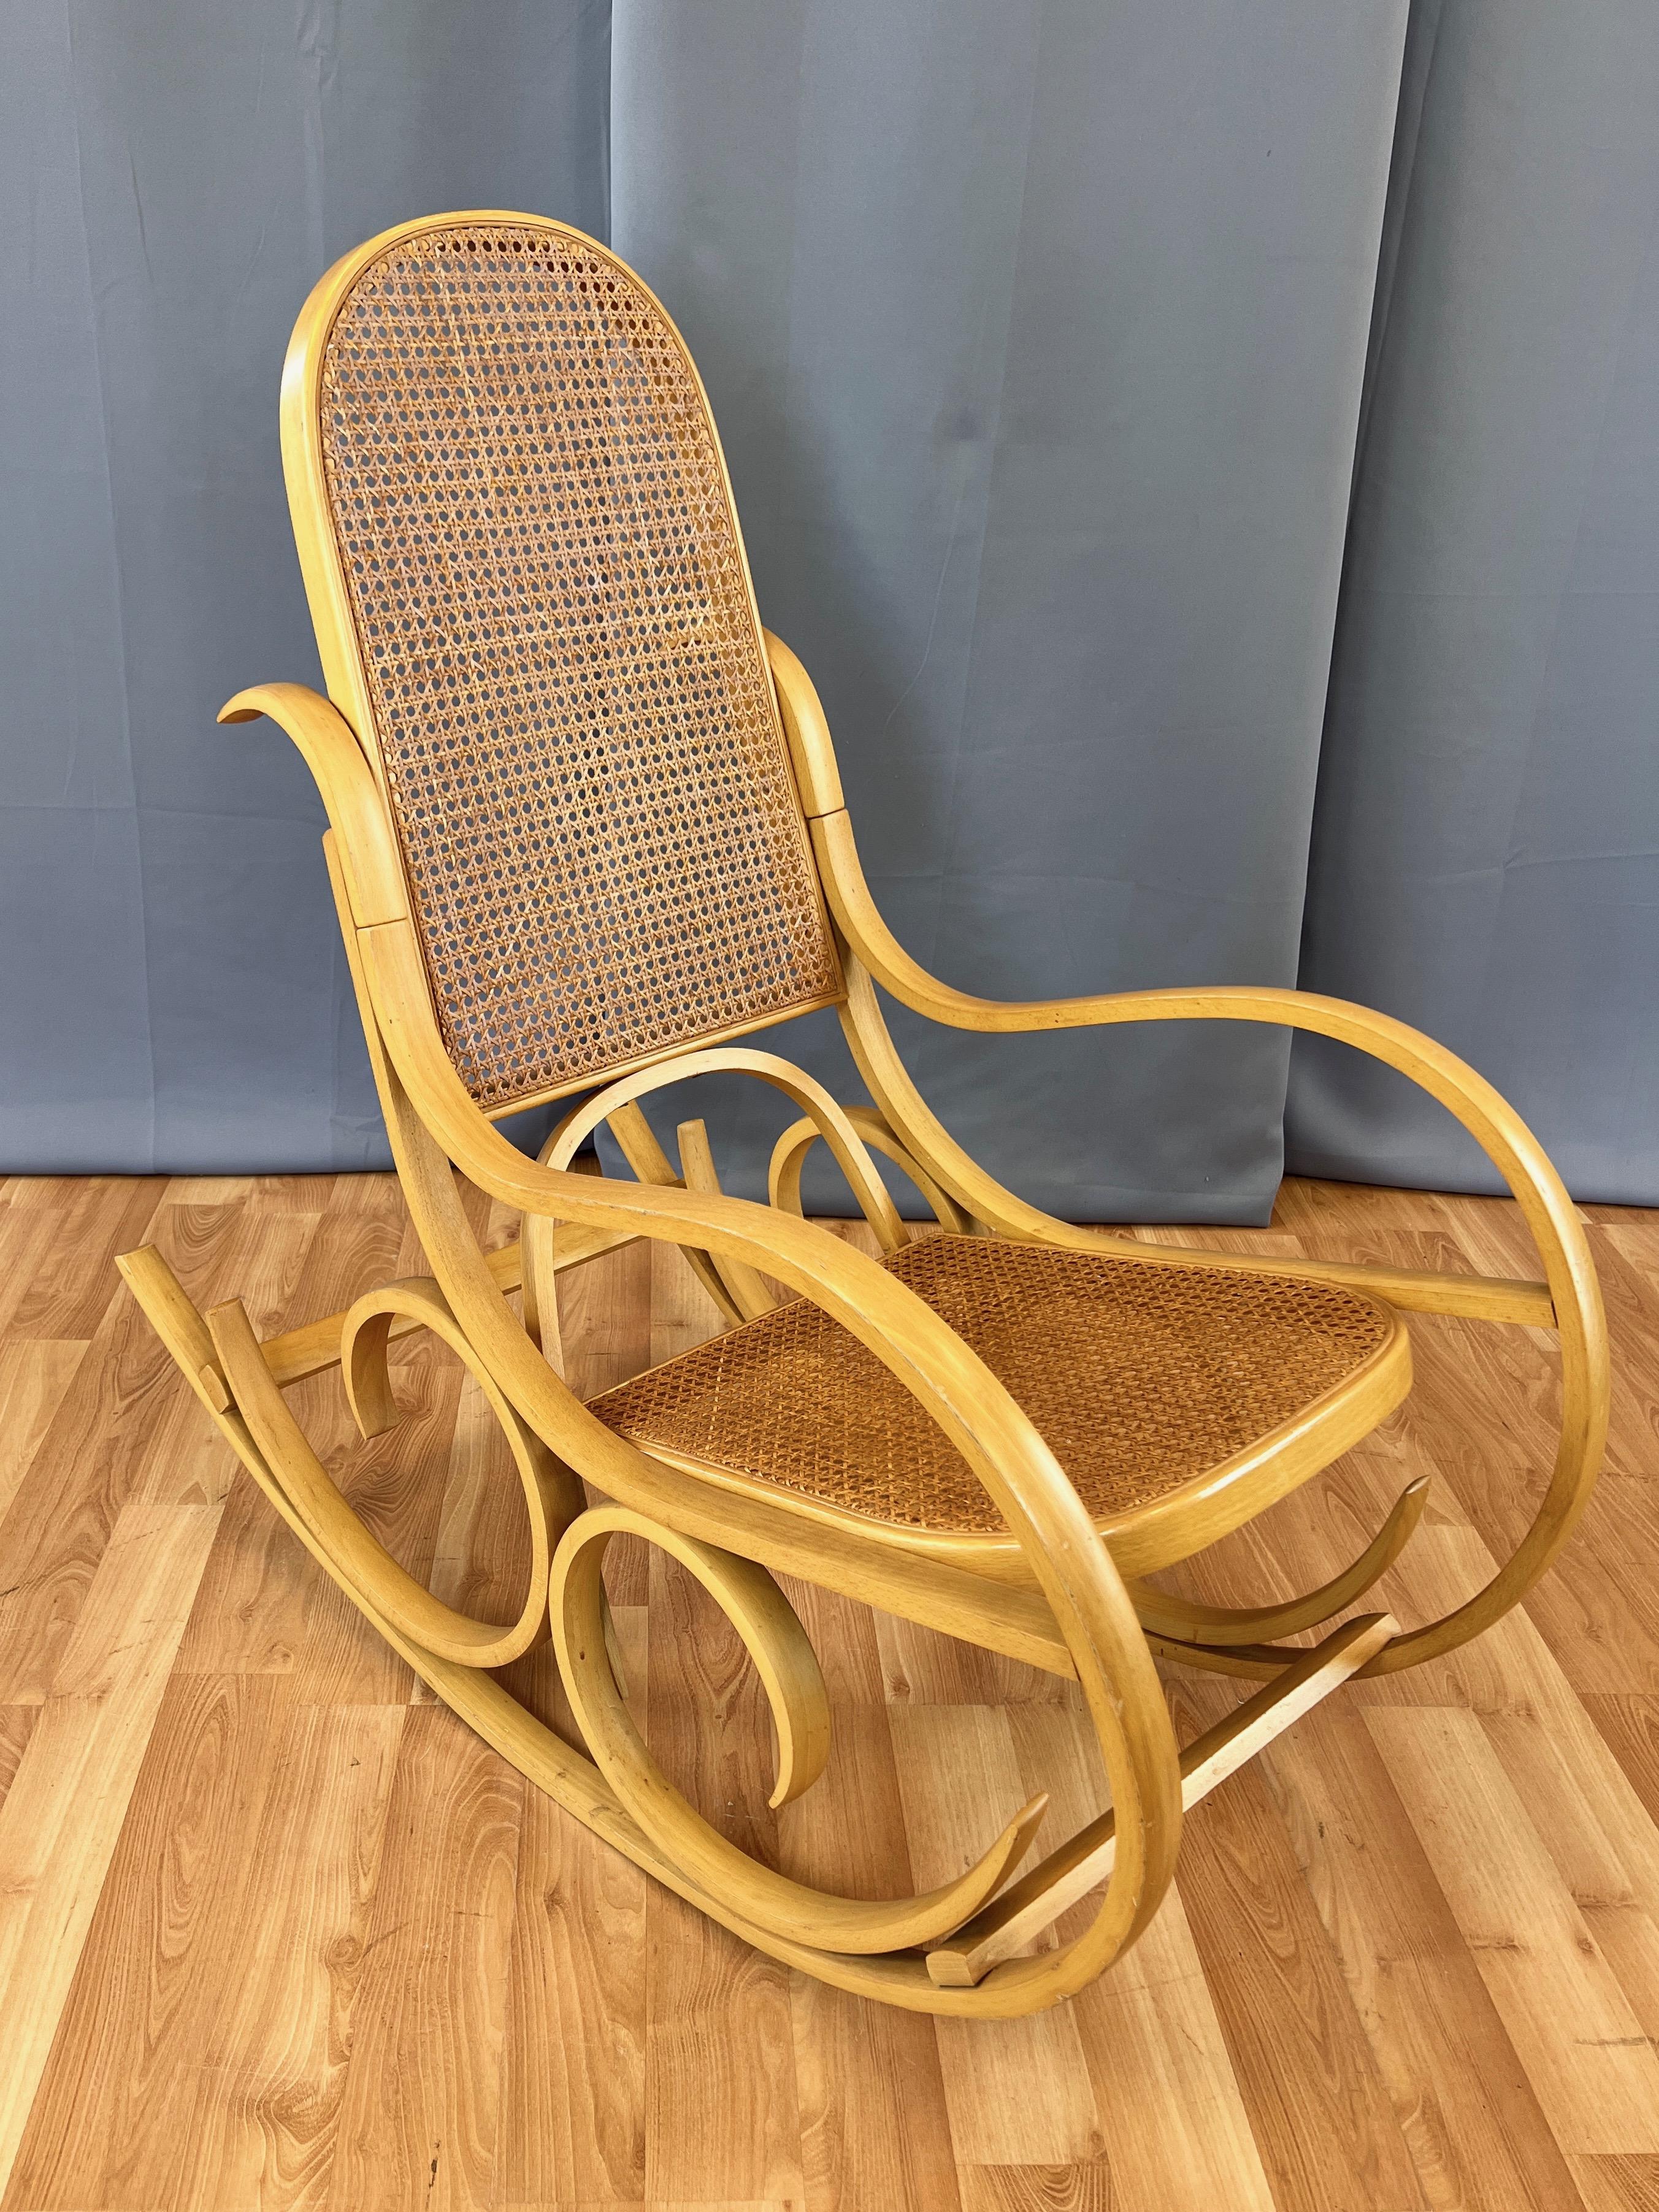 Luigi Crassevig Italian Bentwood Rocking Chair with Woven Cane Seat, 1970s For Sale 2